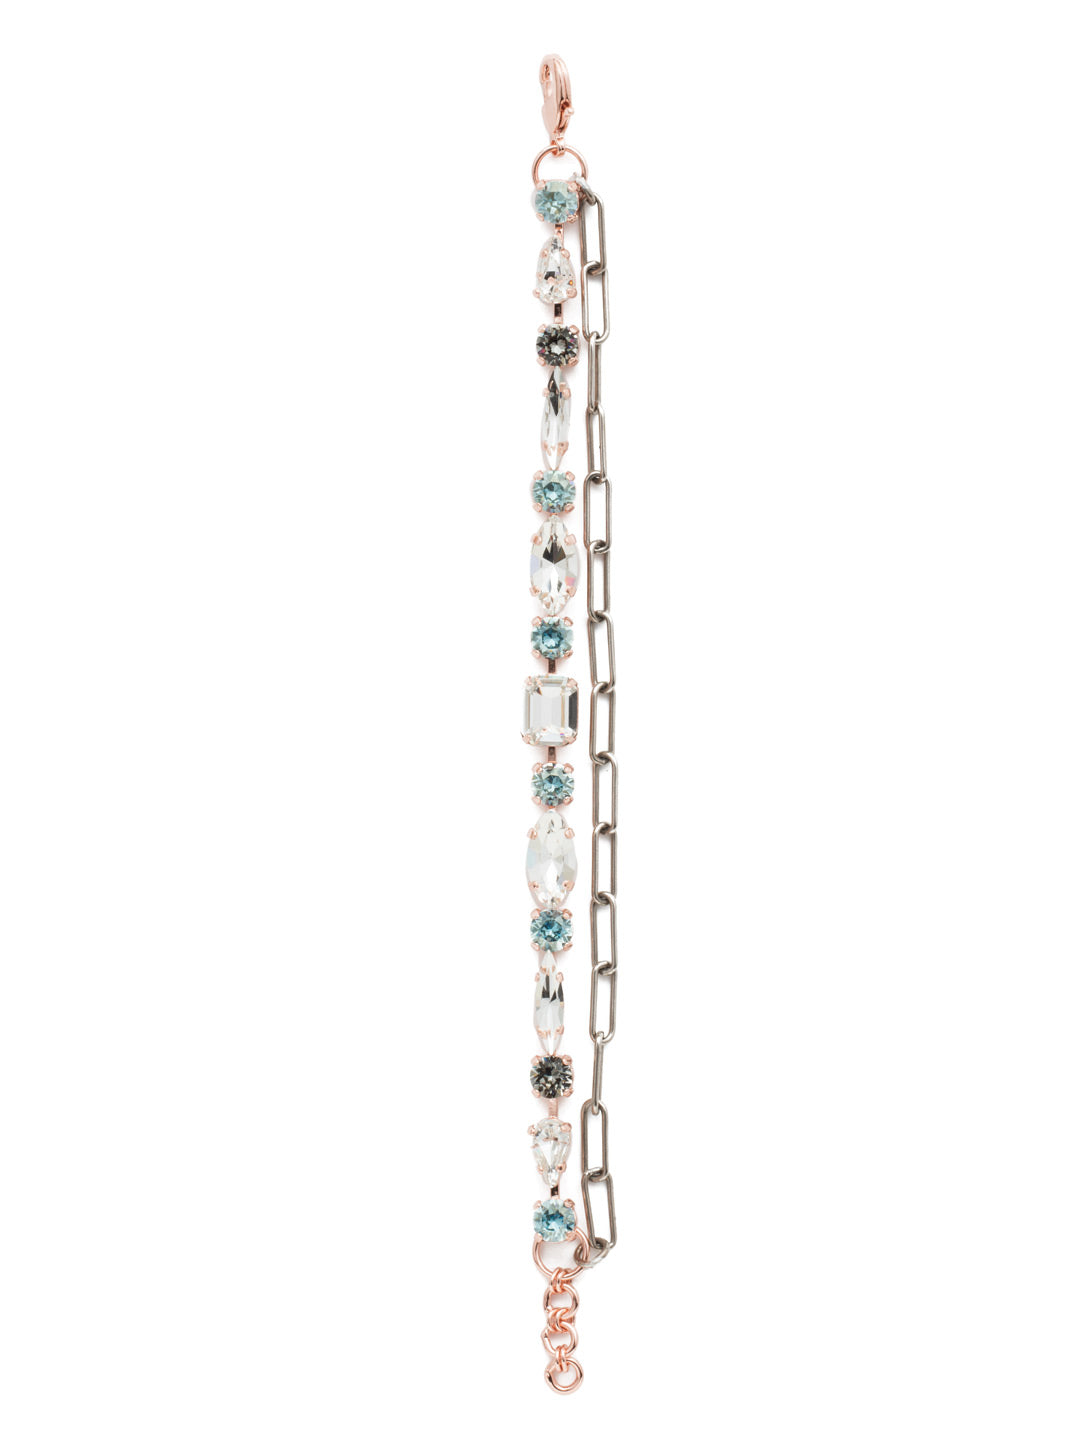 Mayzel Tennis Bracelet - BET1MXCAZ - Loop on a both classic crystal sparkle and metallic edge with the Mayzel Tennis Bracelet. It's stunning with crystals in assorted shapes and fun with a row of chain links. From Sorrelli's Crystal Azure collection in our Mixed Metal finish.